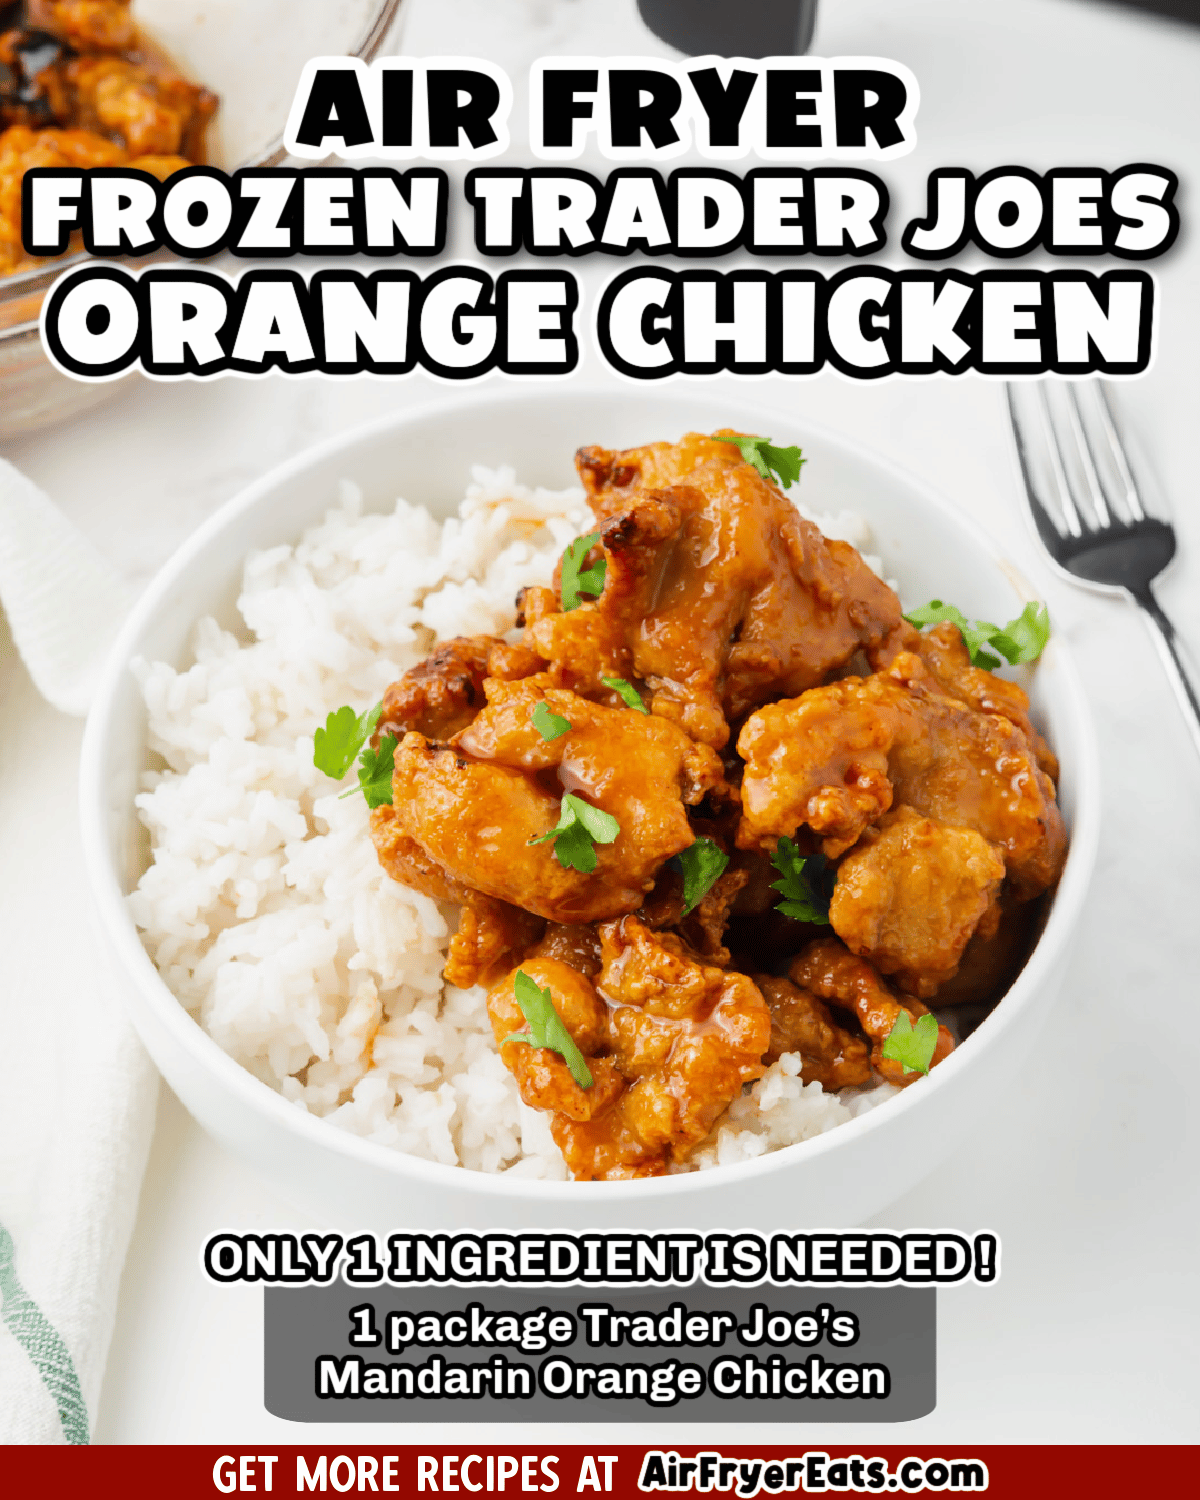 This Trader Joe's Orange Chicken Air Fryer Recipe will help you to make this delicious and popular frozen Chinese chicken in just minutes. via @vegetarianmamma